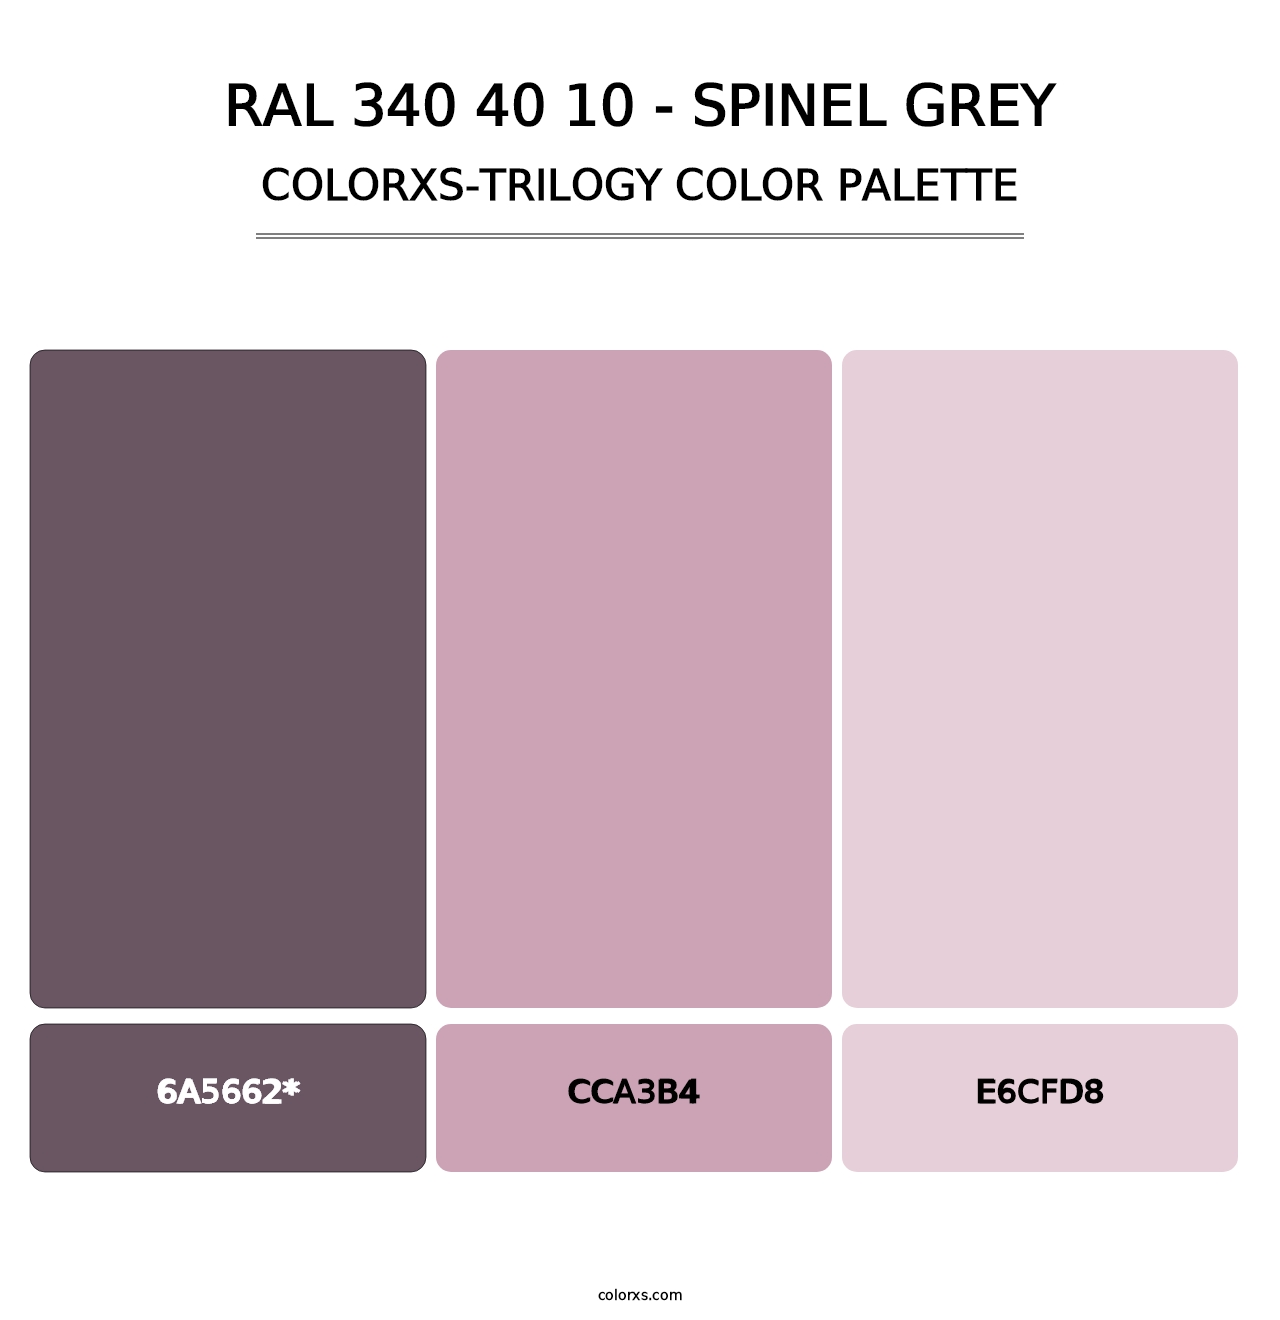 RAL 340 40 10 - Spinel Grey - Colorxs Trilogy Palette